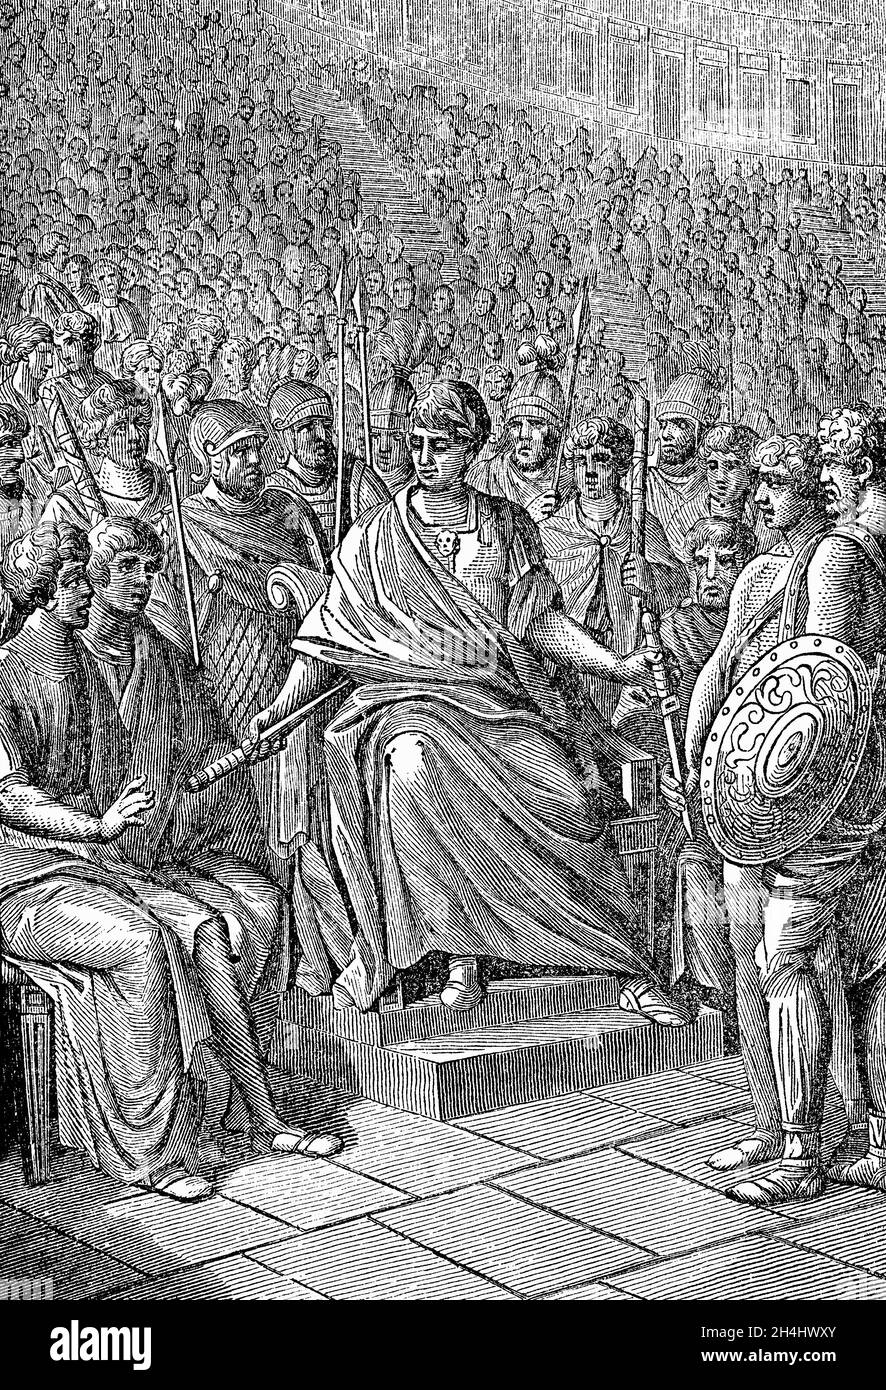 A late 19th Century illustration of Flavius Honorius (384-423), Roman emperor from 393 to 423 during which time he ended gladiatorial combat. He was the younger son of emperor Theodosius I and his first wife Aelia Flaccilla. In 410, during Honorius's reign over the western Roman Empire, Rome was sacked for the first time in almost 800 years. Stock Photo